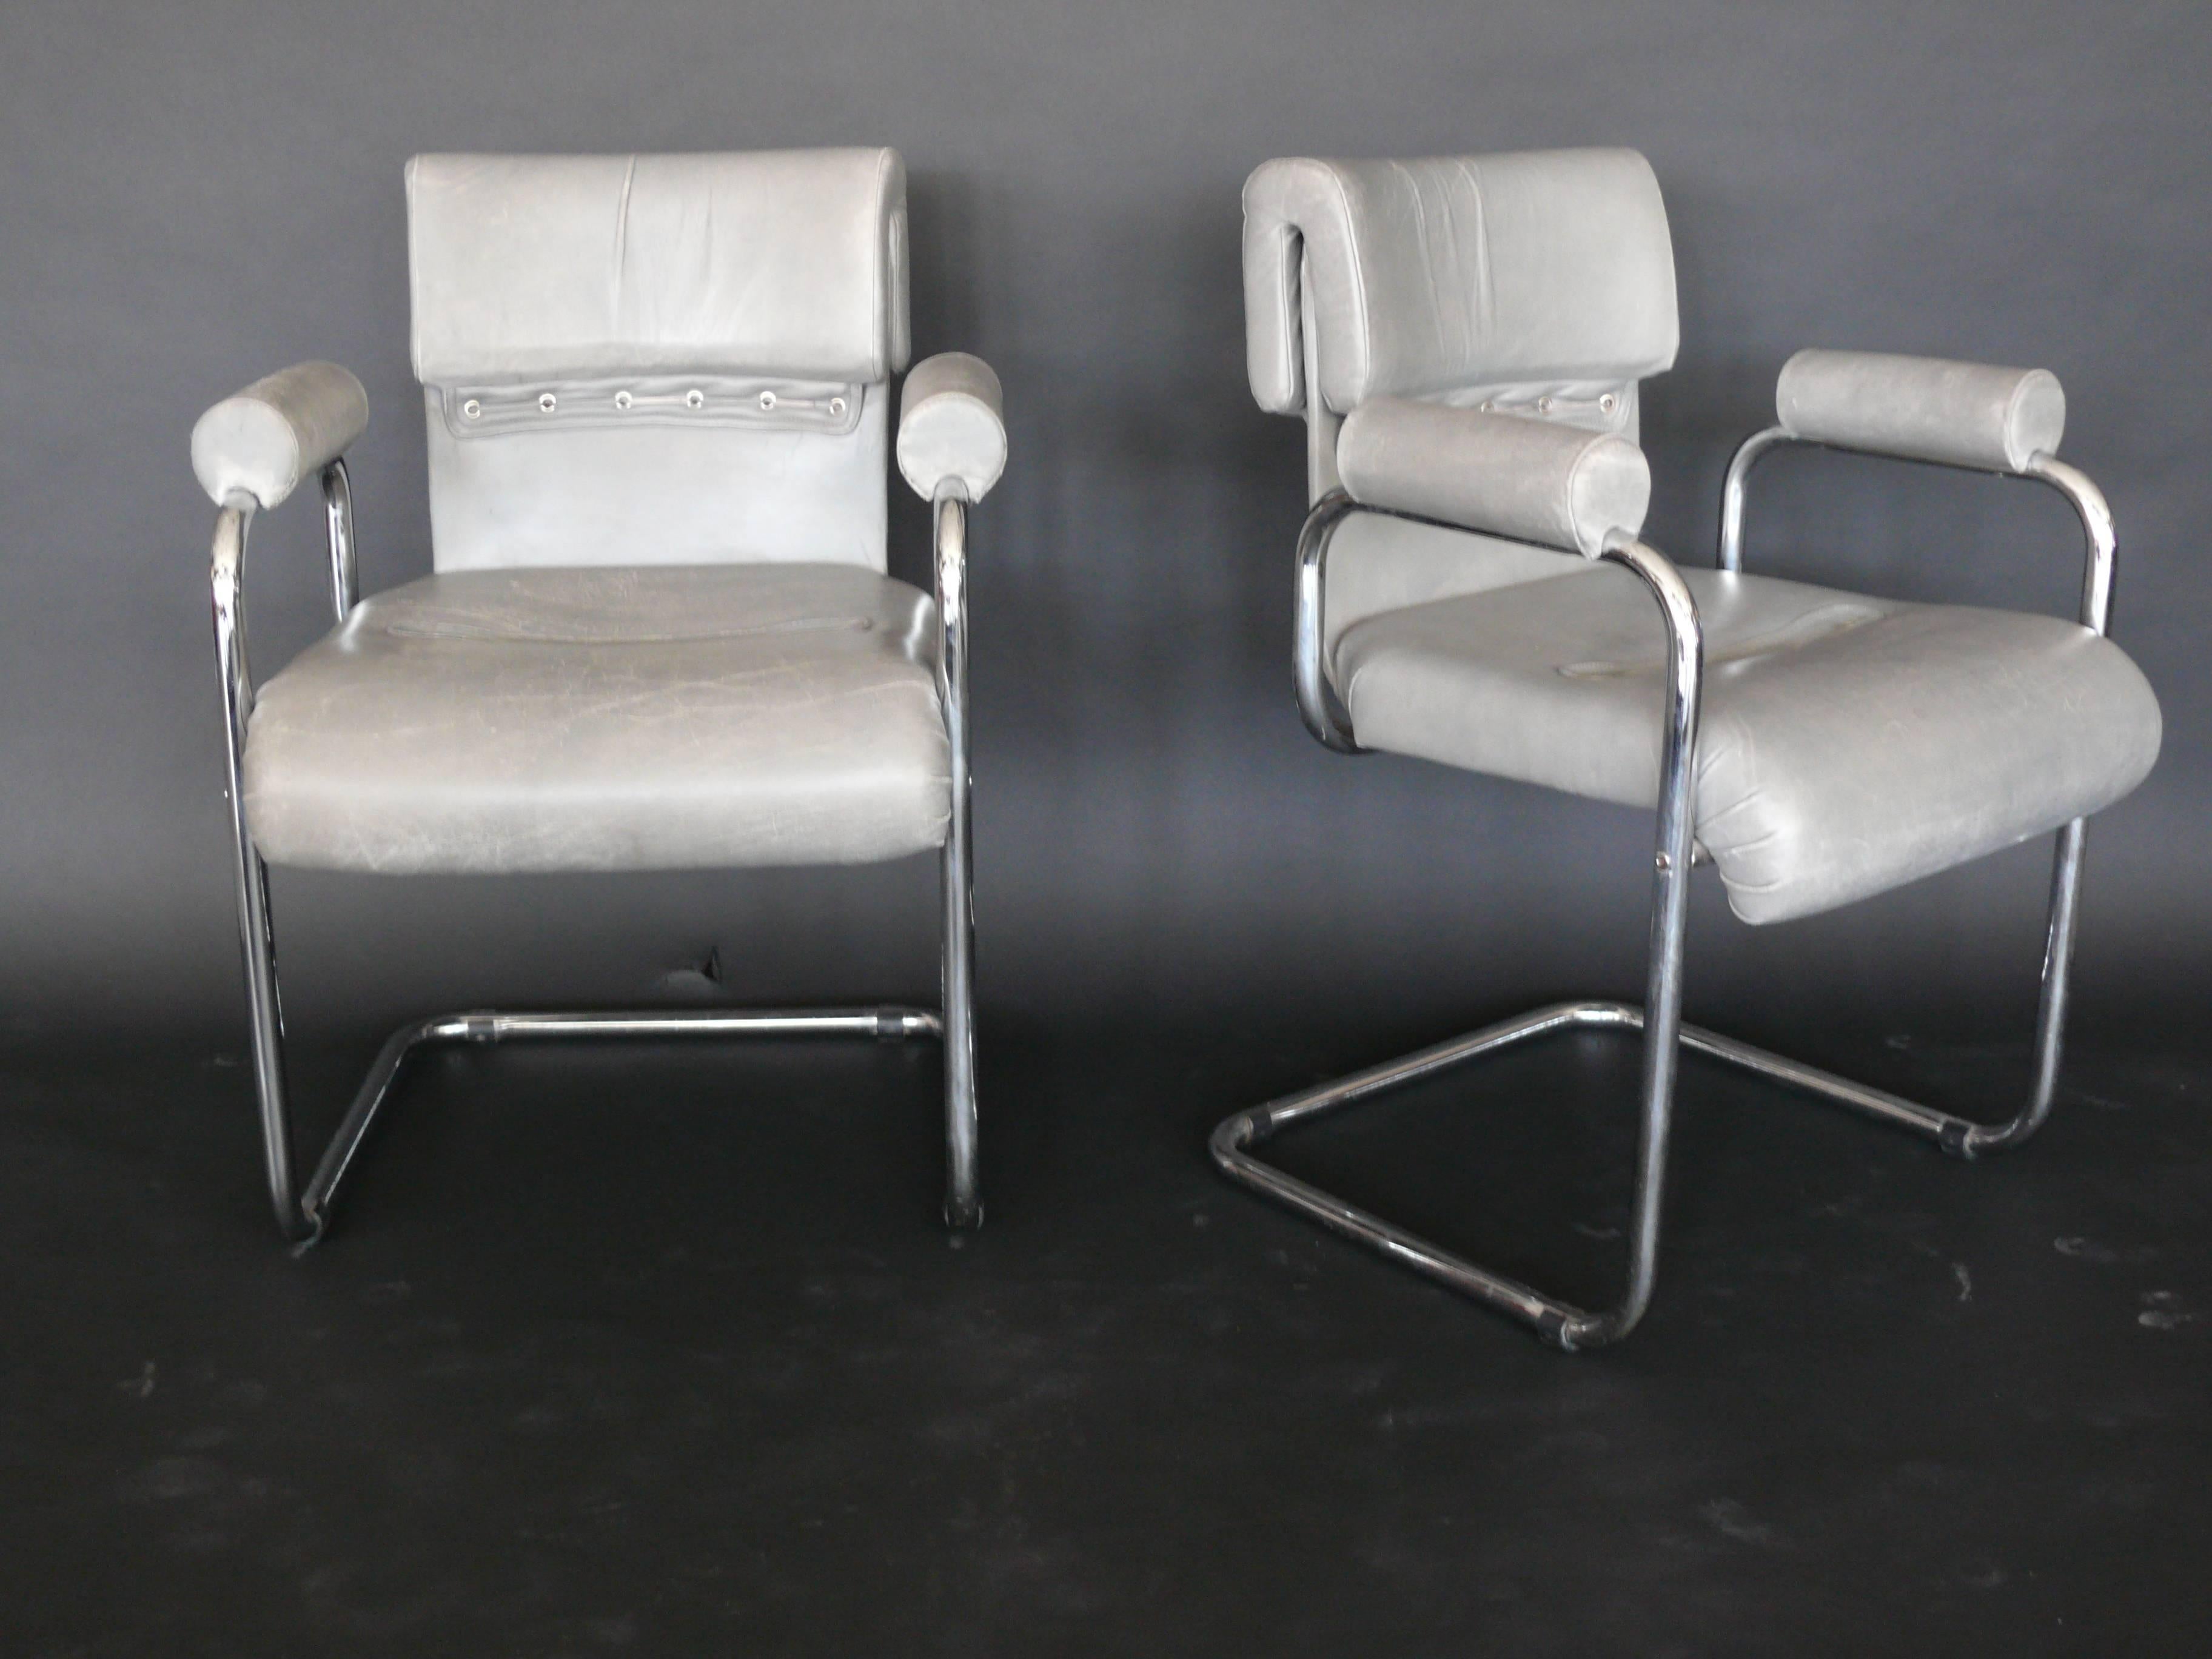 Amazing vintage grey leather chairs by Mariani for Pace Collection. Simple tubular chrome base with original soft grey leather cushions. Fantastic leather corset detailing in the back with leather straps. Sold as a set of four.